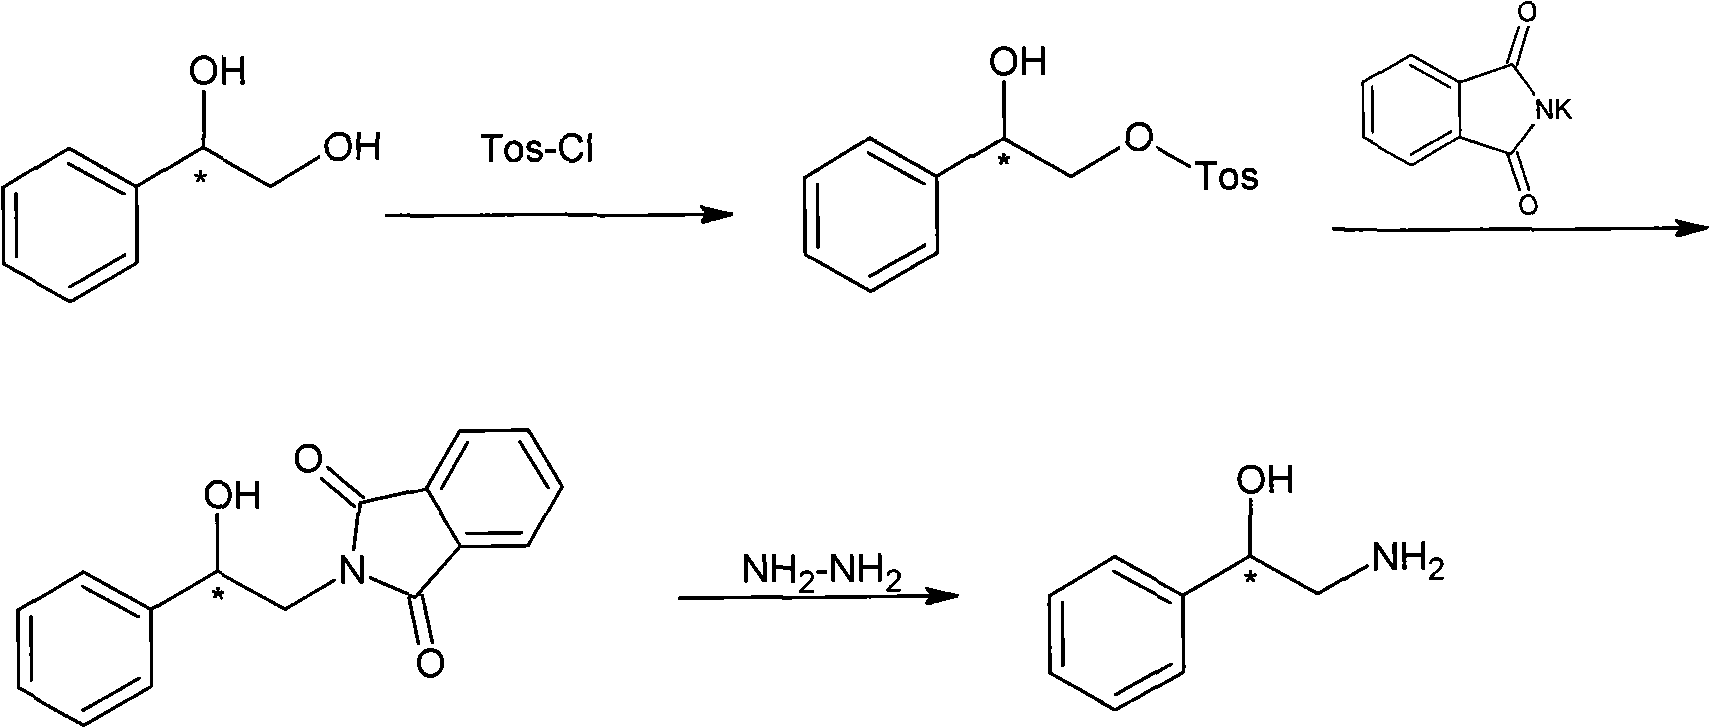 Method for preparing chiral medicinal intermediate 2-amido-1-phenylethylalcohol